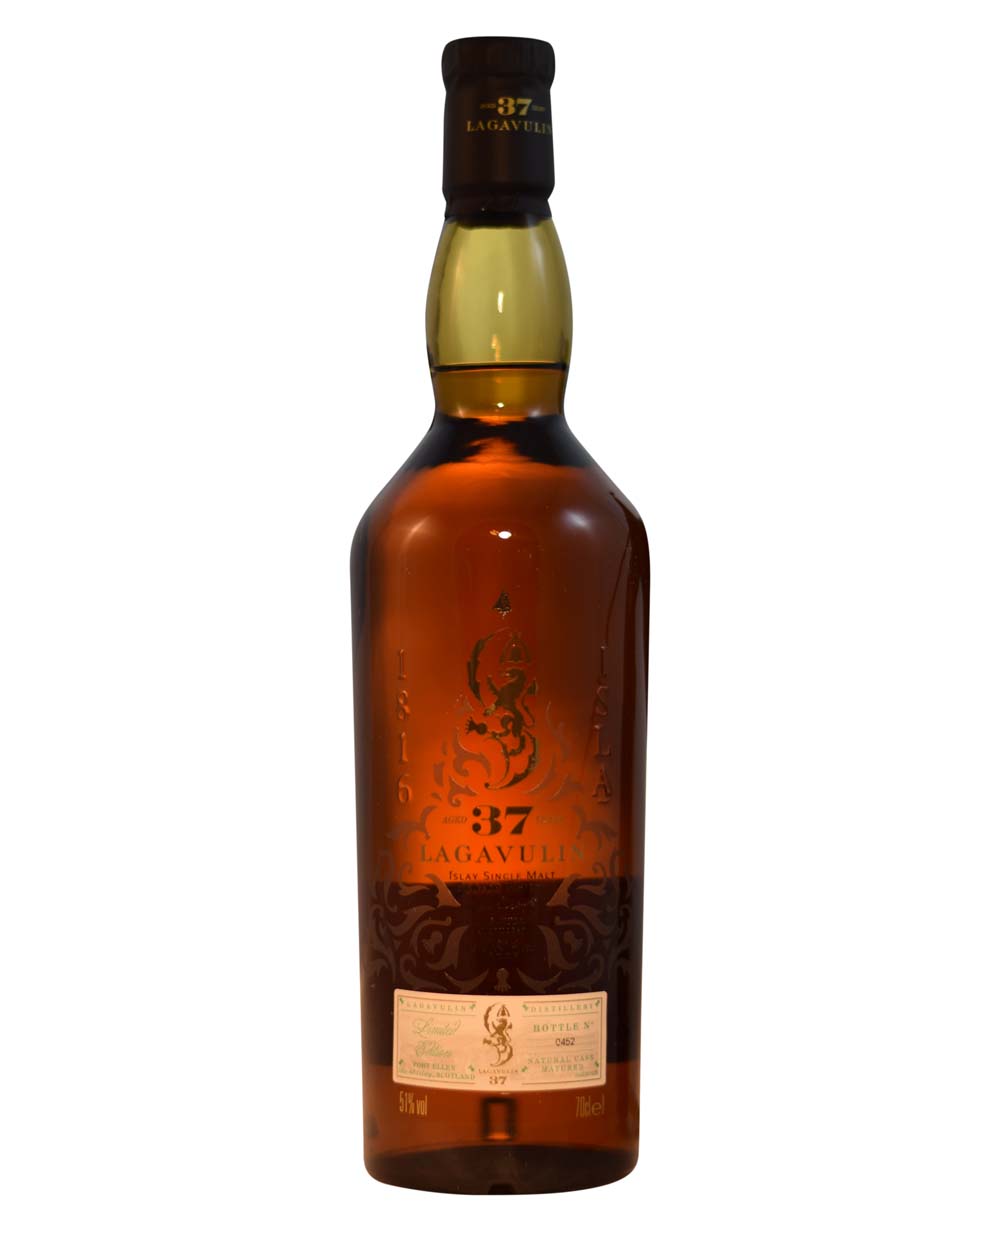 Lagavulin 37 Years Old Musthave Malts MHM